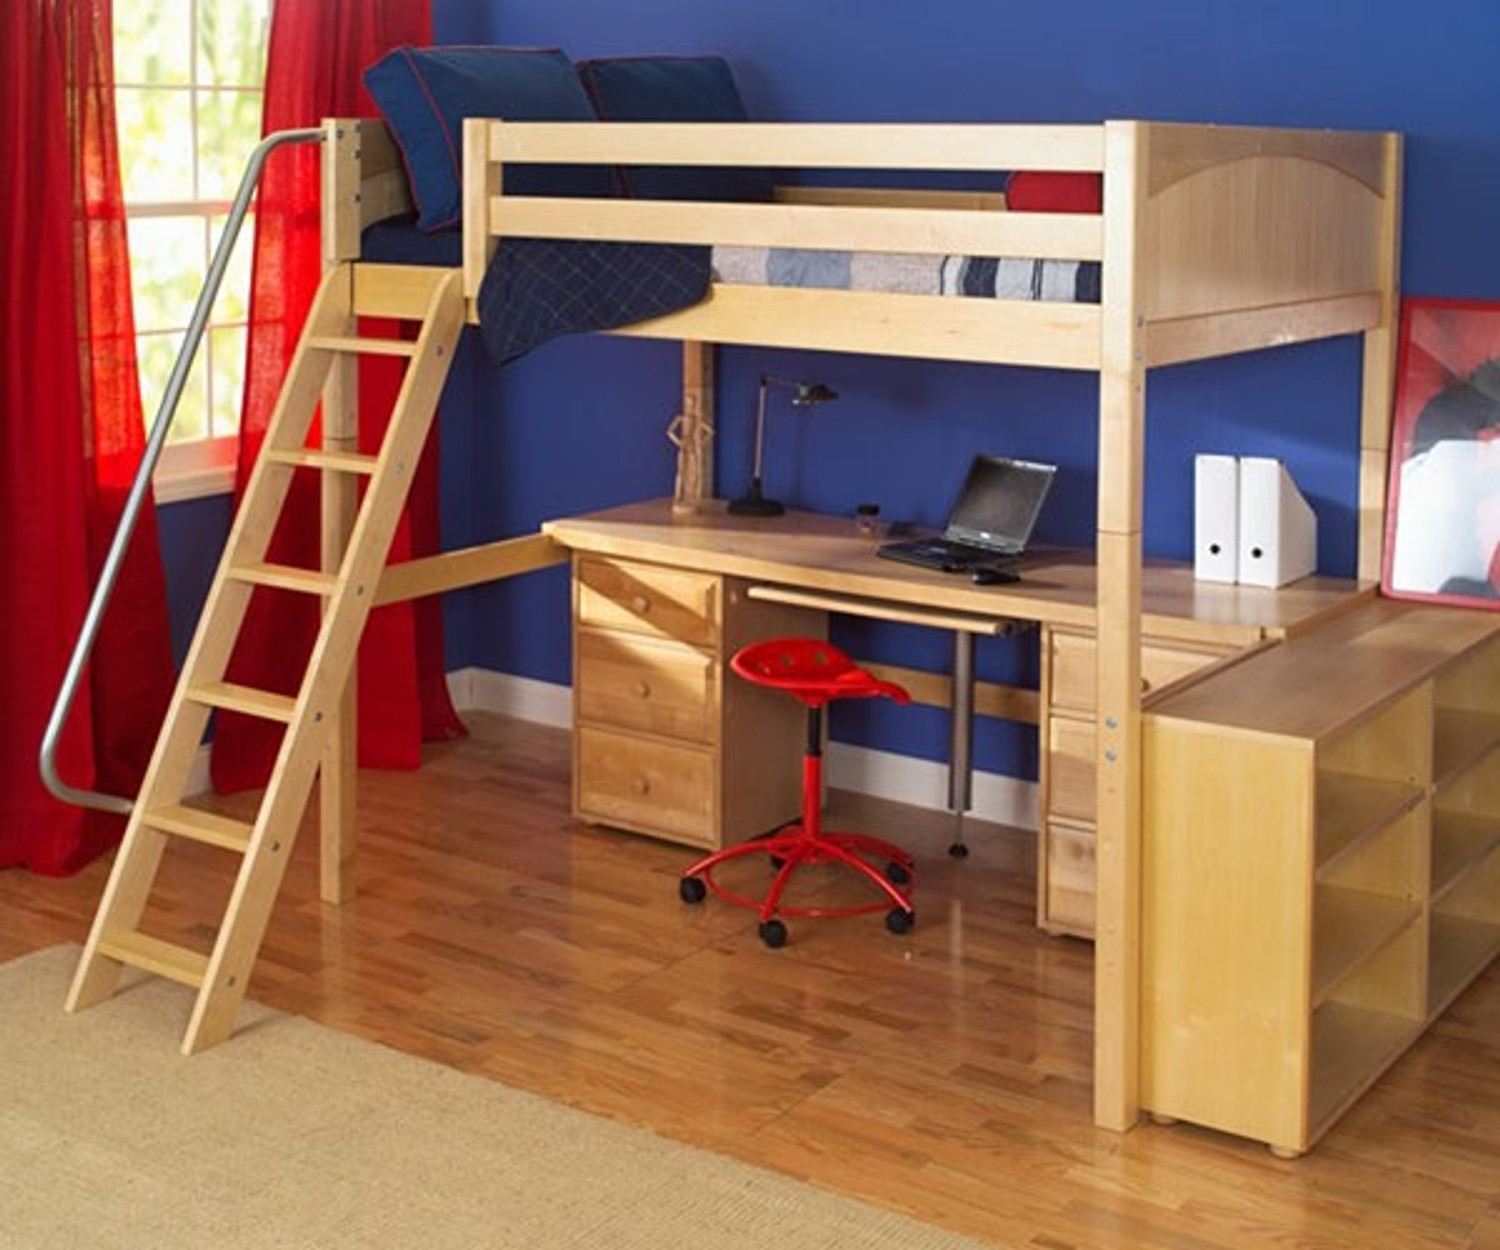 Loft Bed with Desk for Small Room & Study Environments – Maxtrix Kids